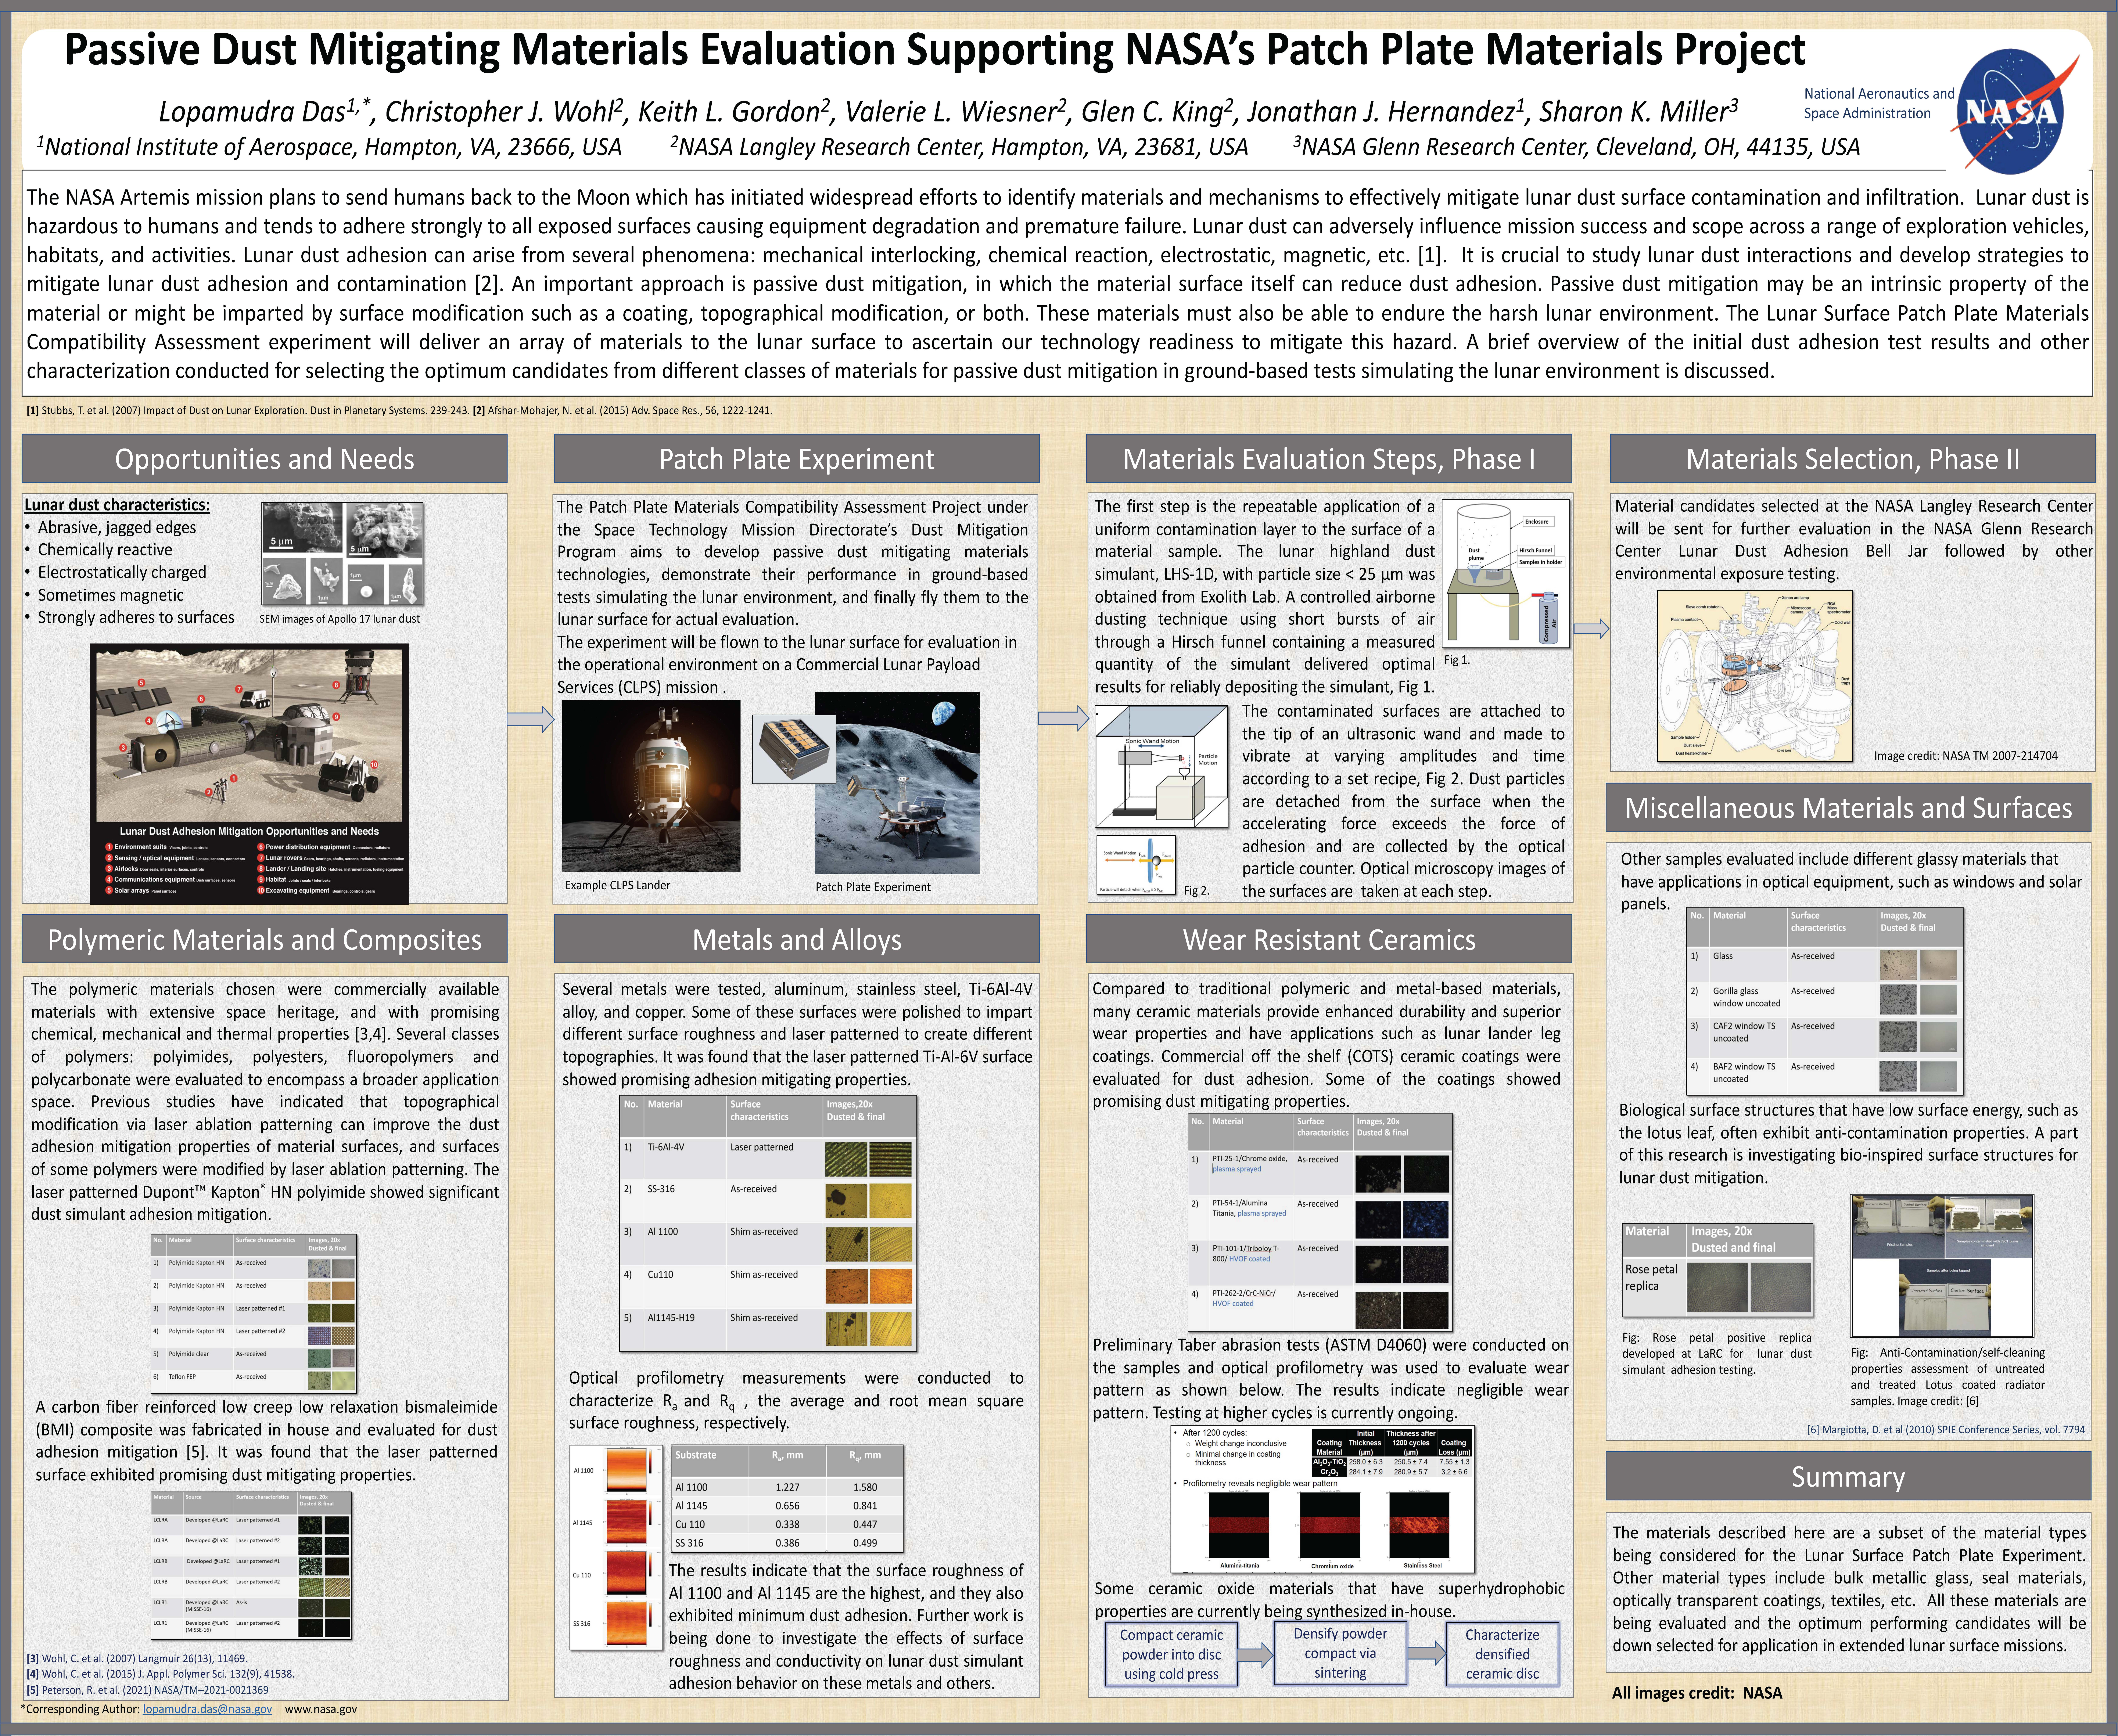 Passive Dust Mitigating Materials Evaluation Supporting NASA’s Patch Plate Materials Compatibility Assessment Project